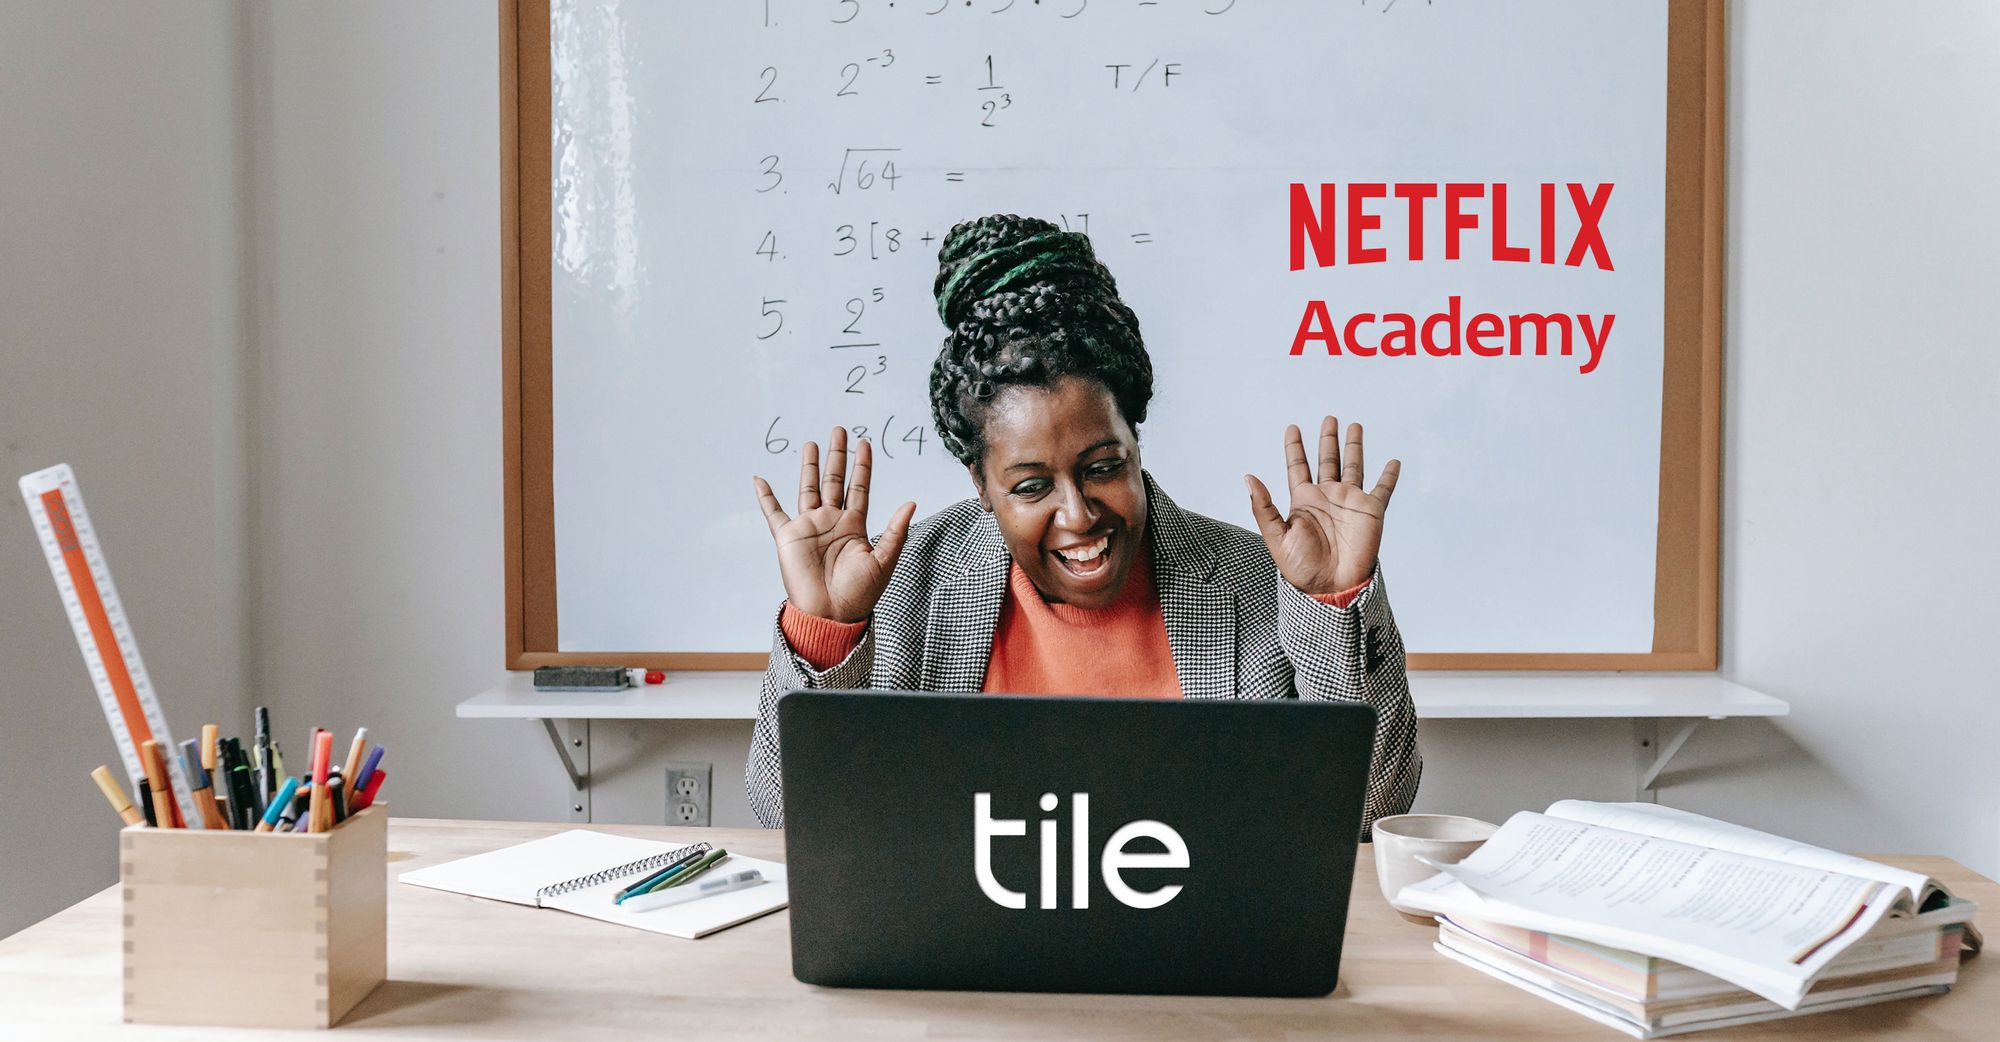 Tile: the company that should have learned from Netflix